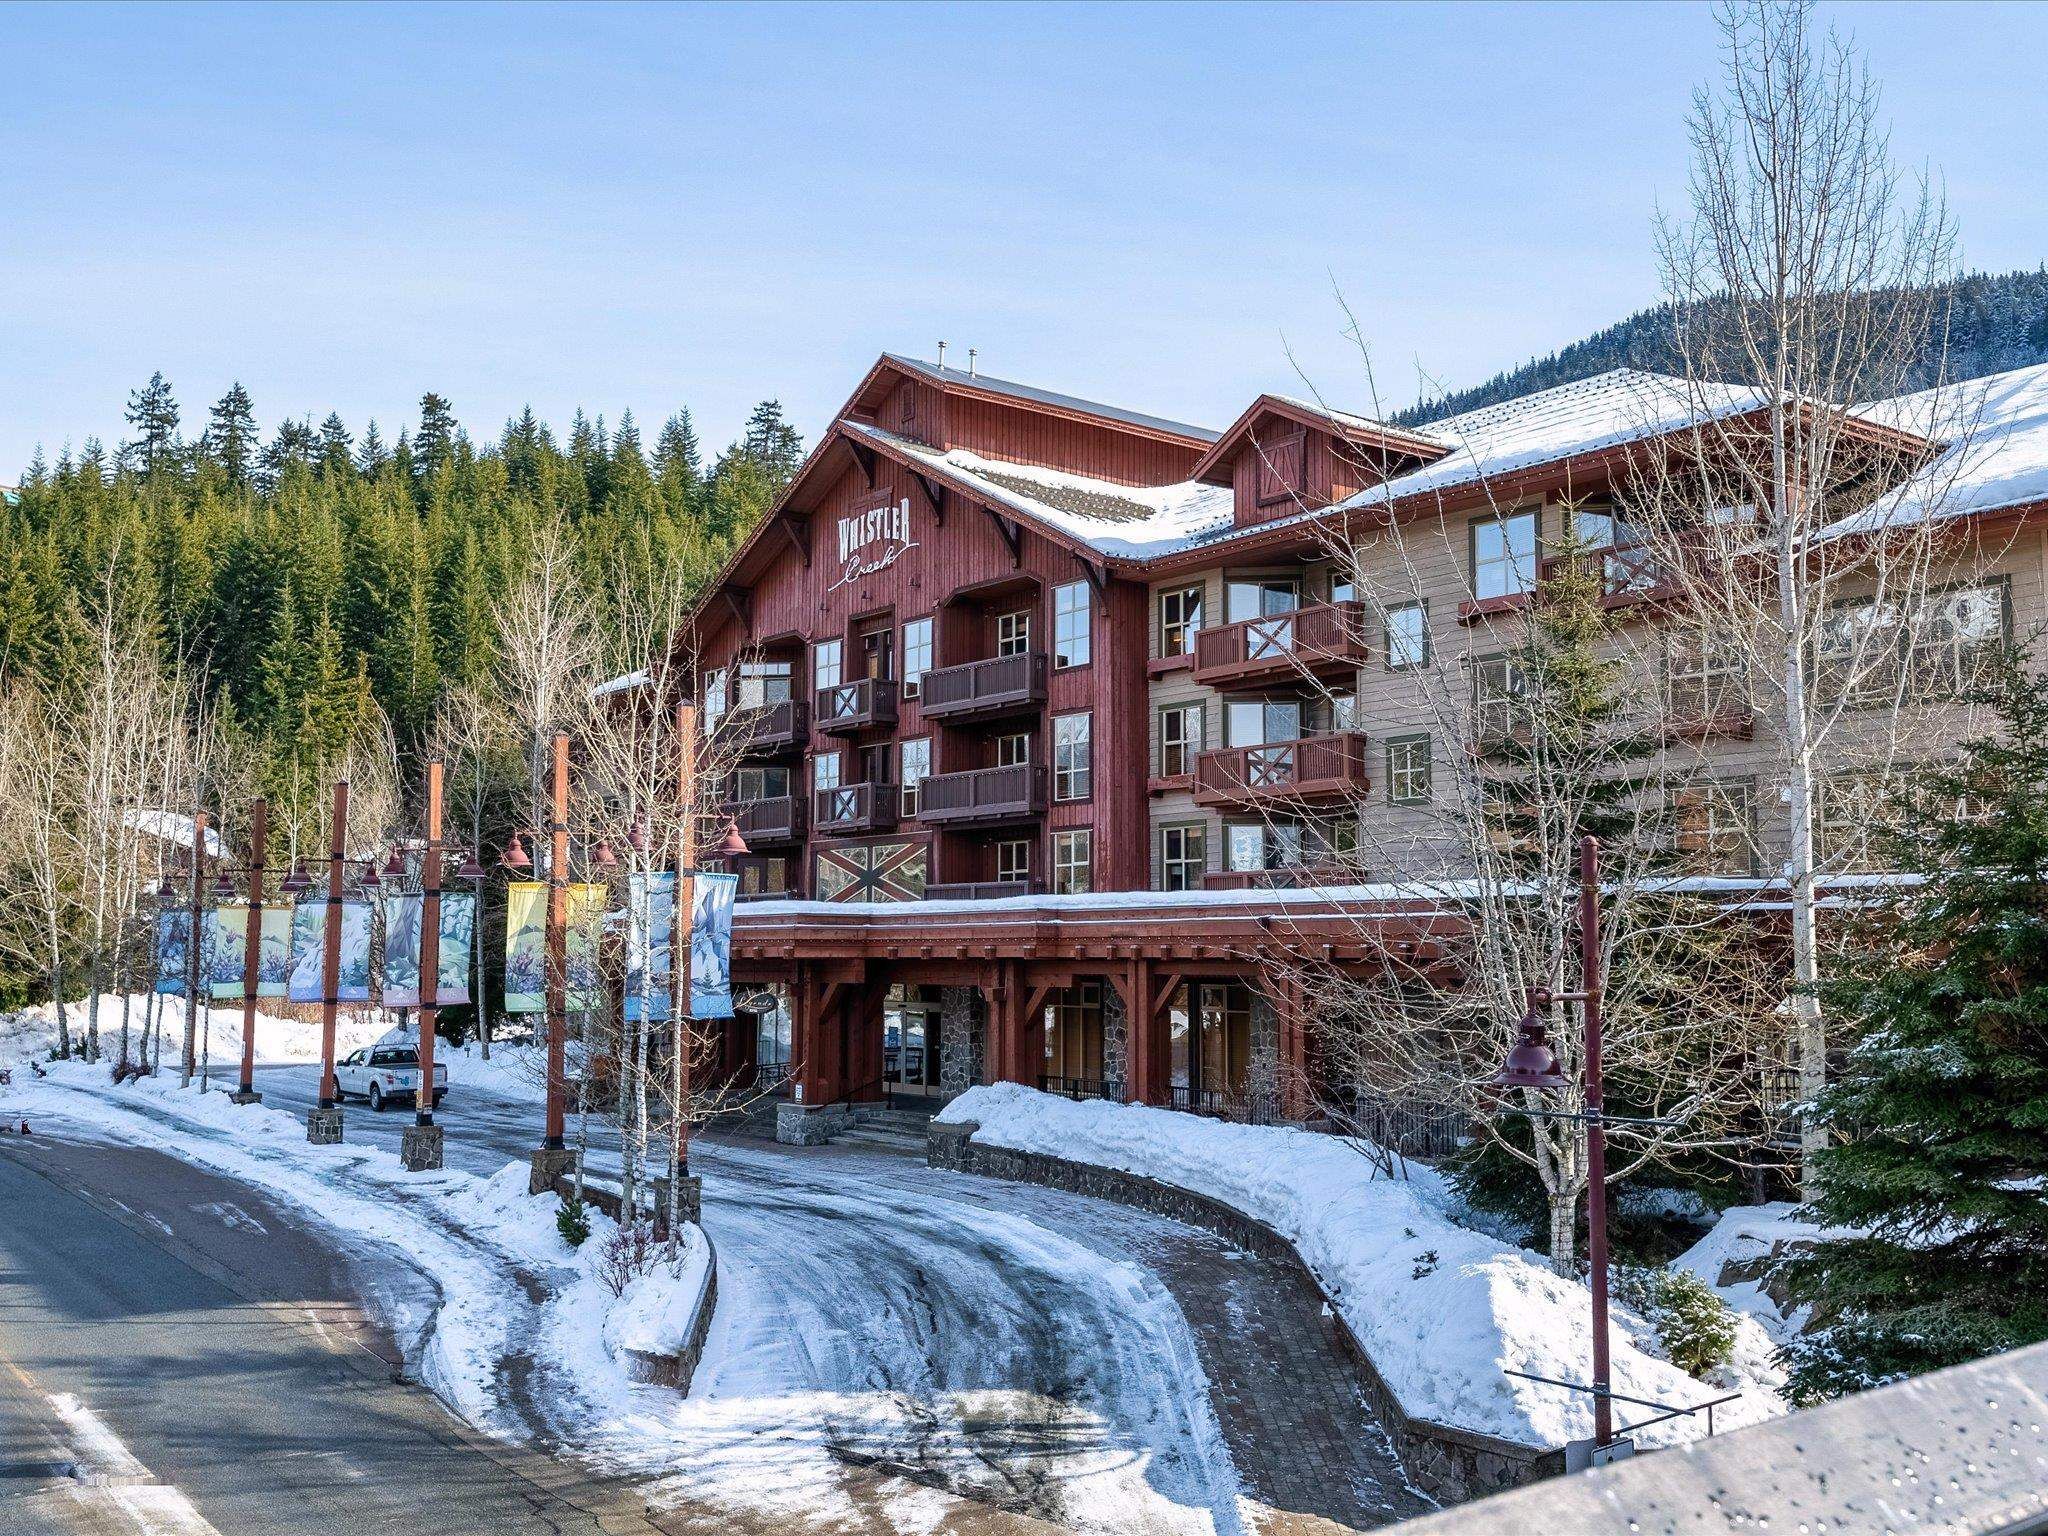 New property listed in Whistler Creek, Whistler